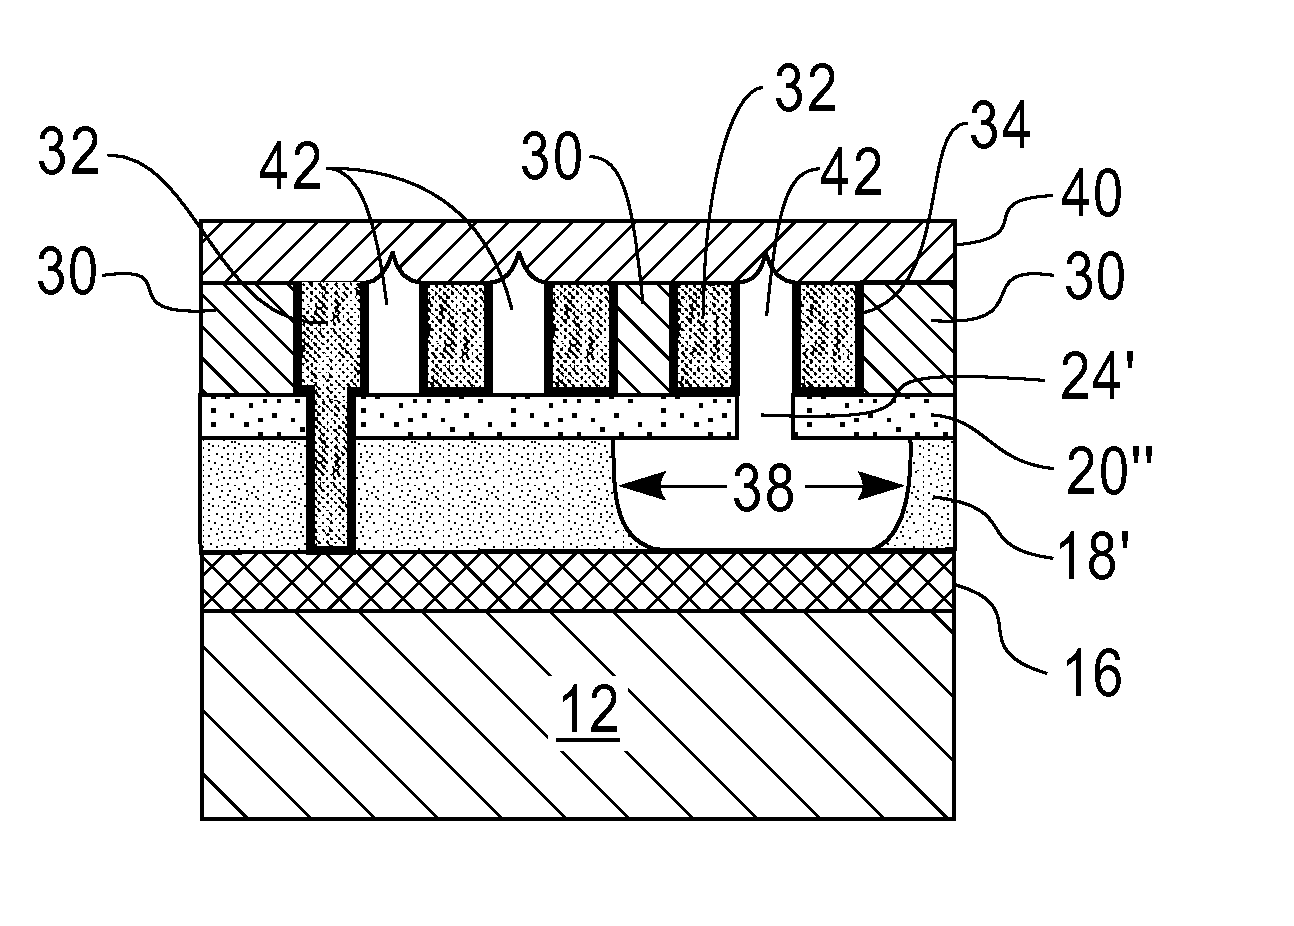 Method for air gap interconnect integration using photo-patternable low k material